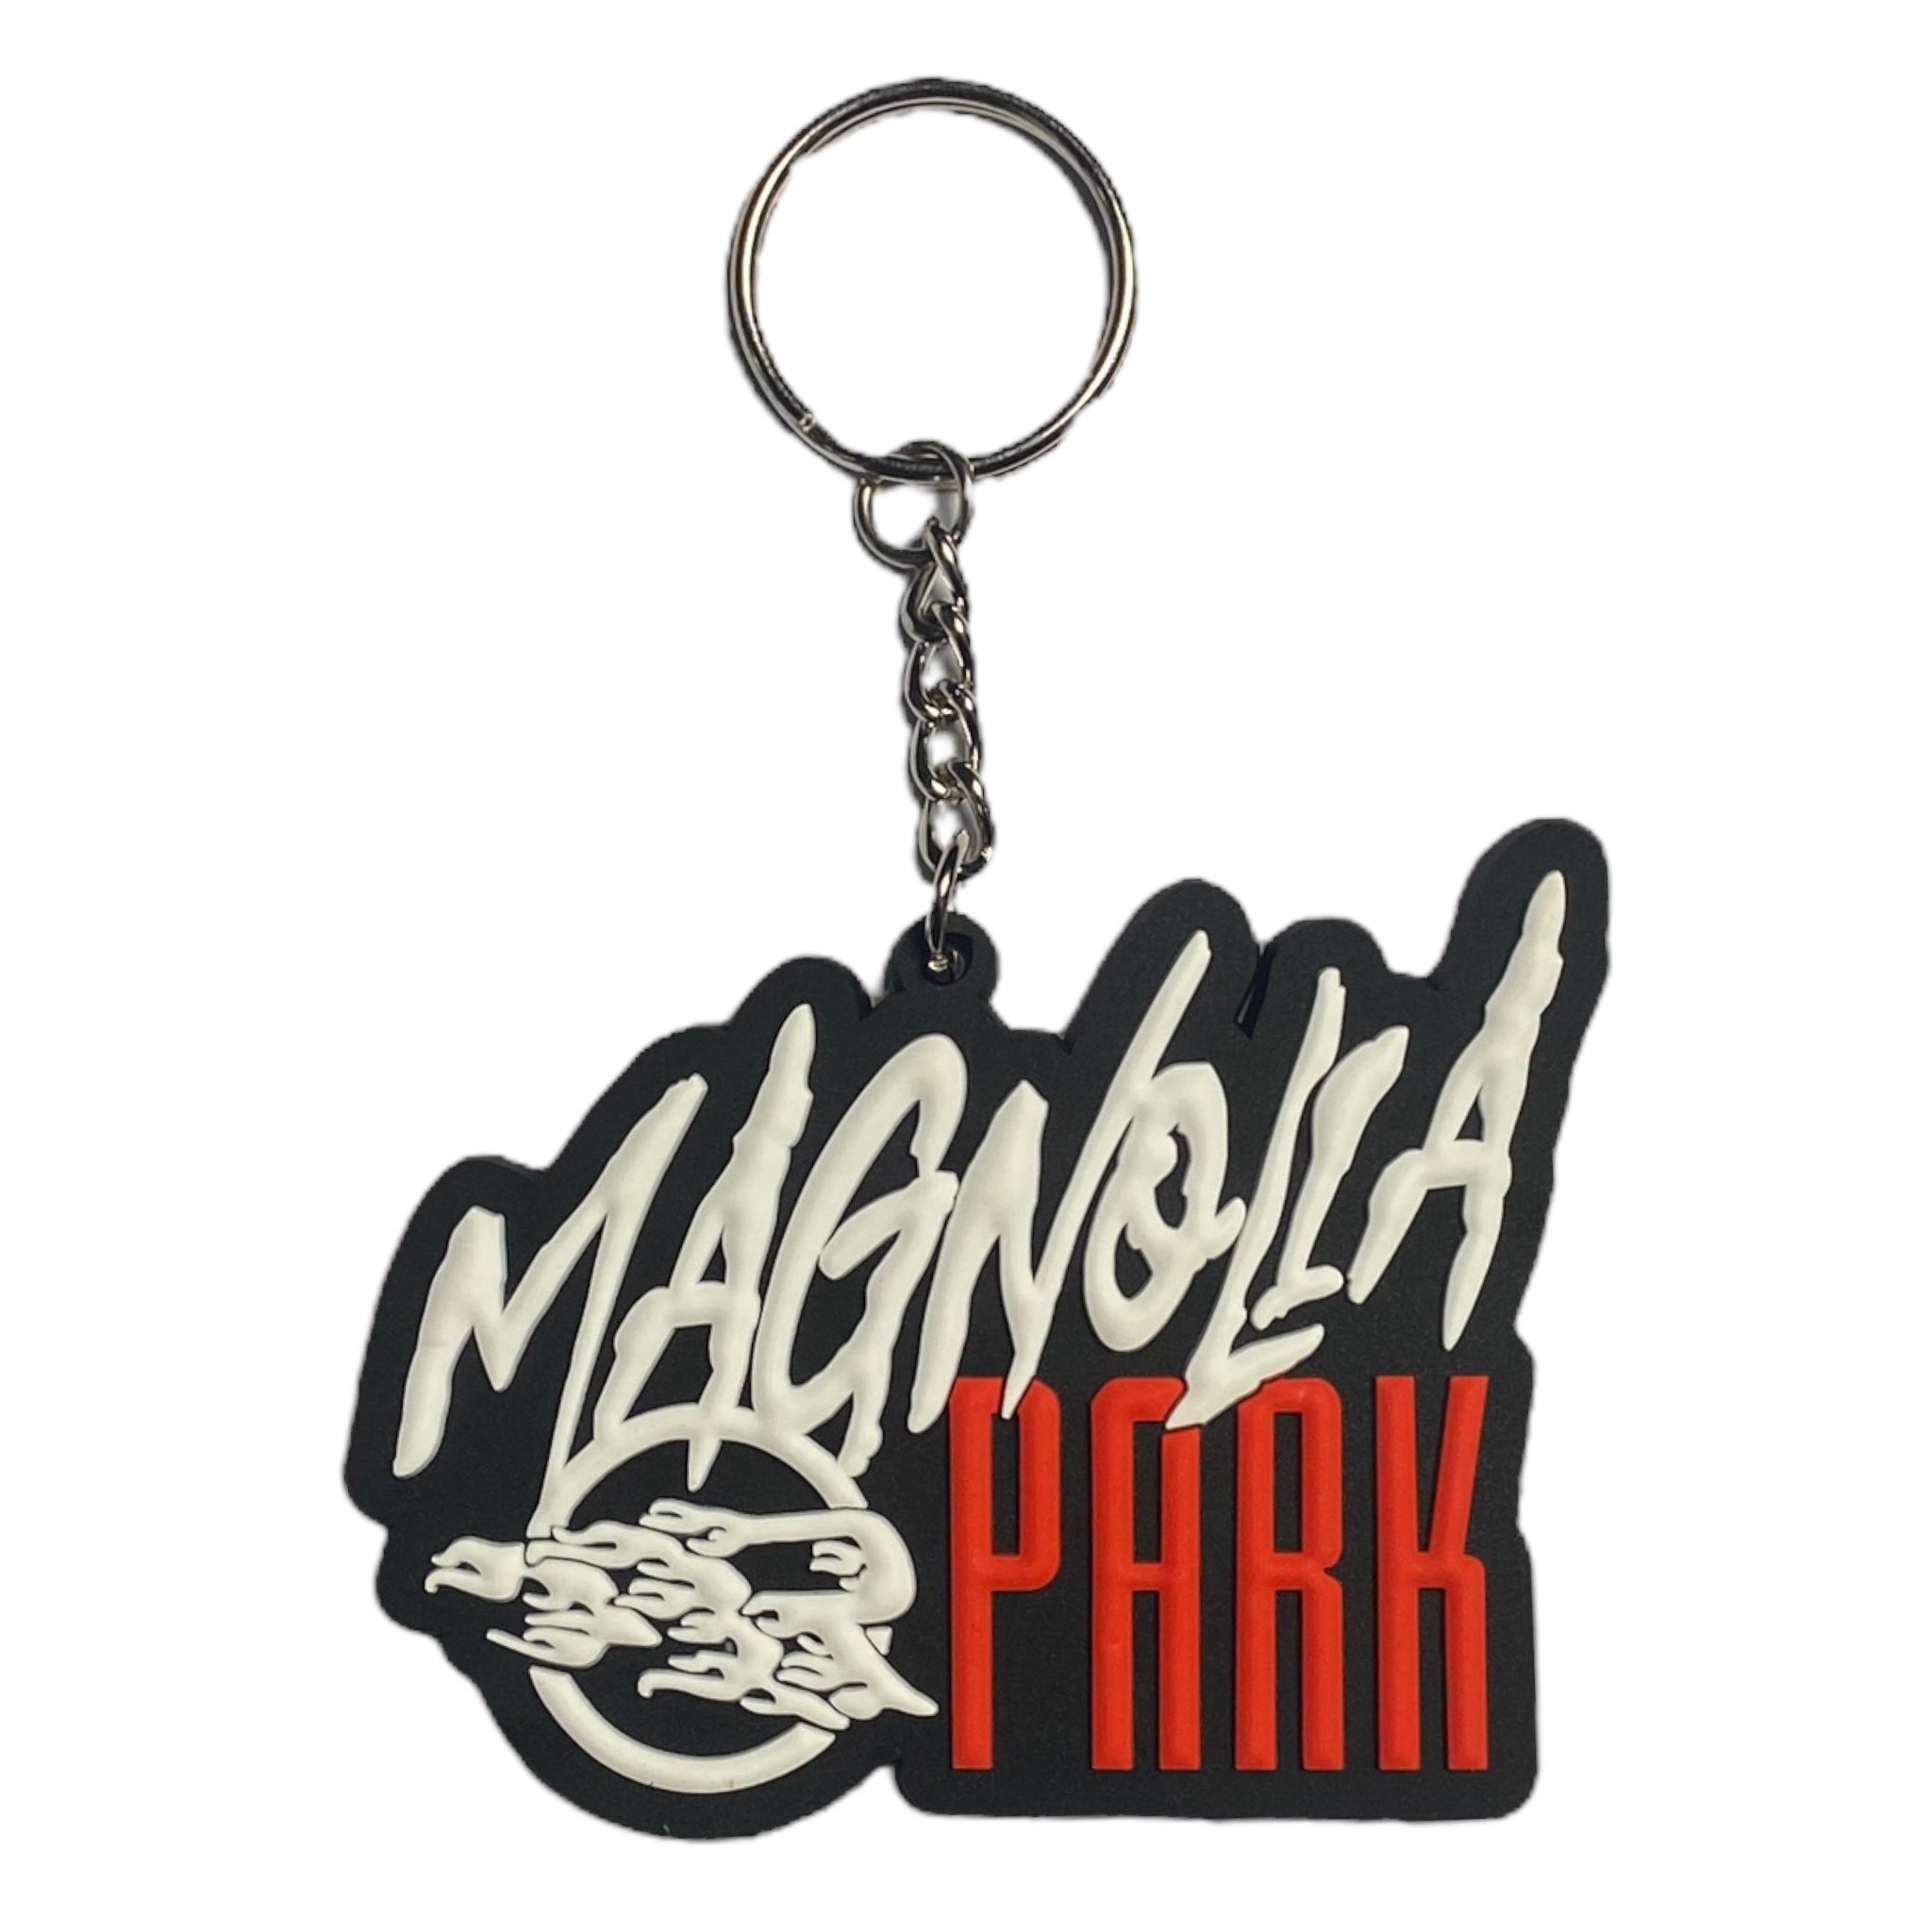 The Magnolia Park Flame Logo Keychain (Black/Red)